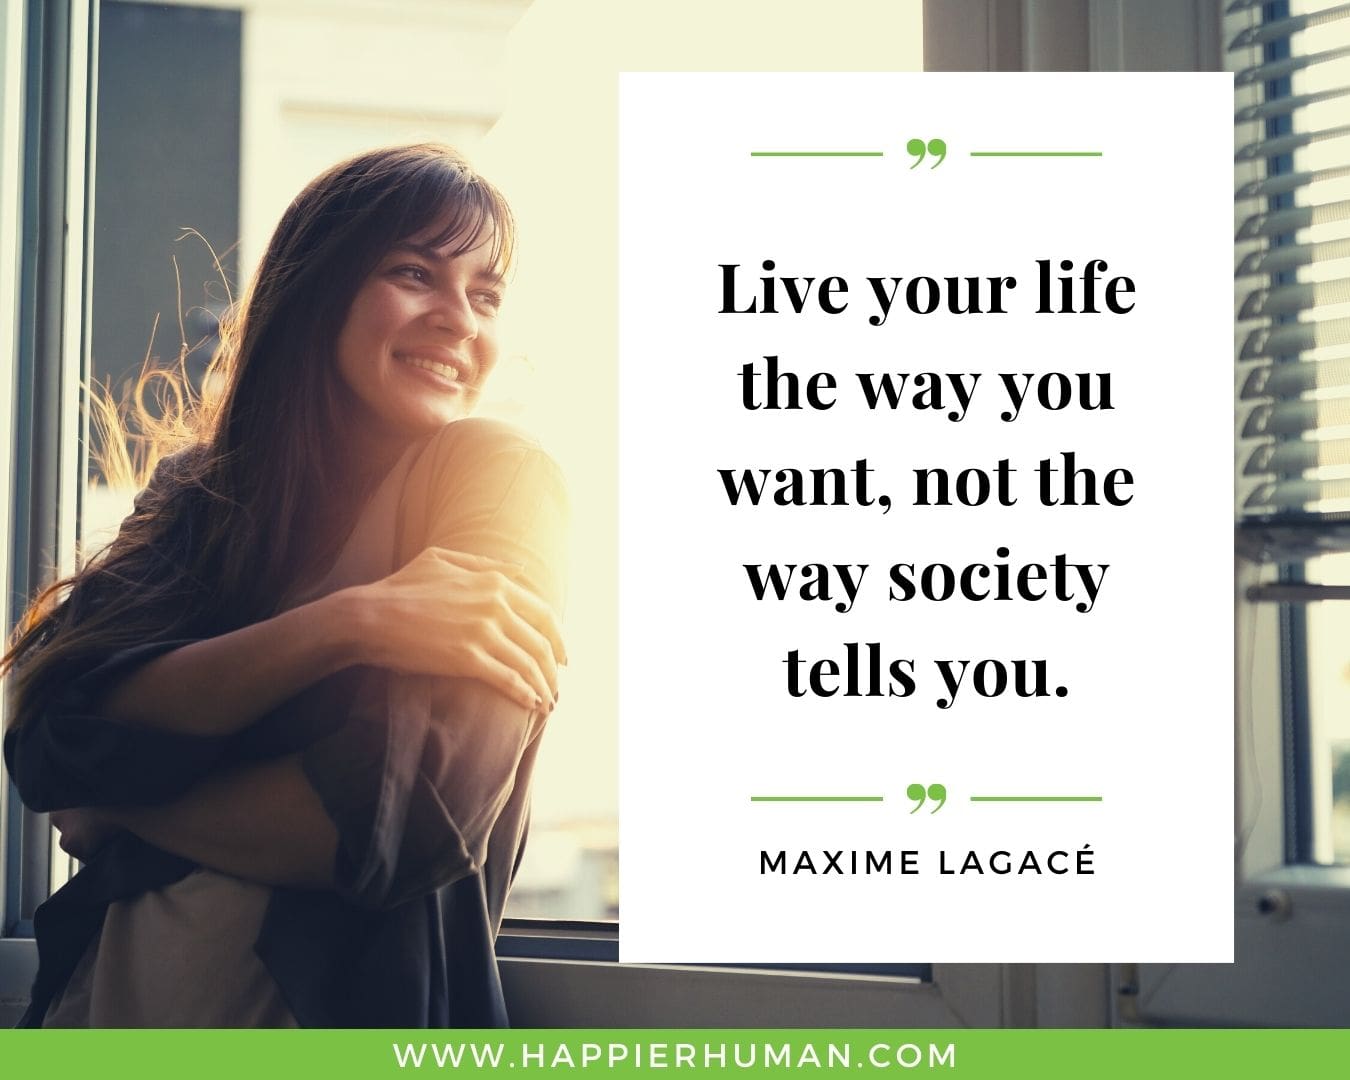 Introvert Quotes - “Live your life the way you want, not the way society tells you.” – Maxime Lagacé